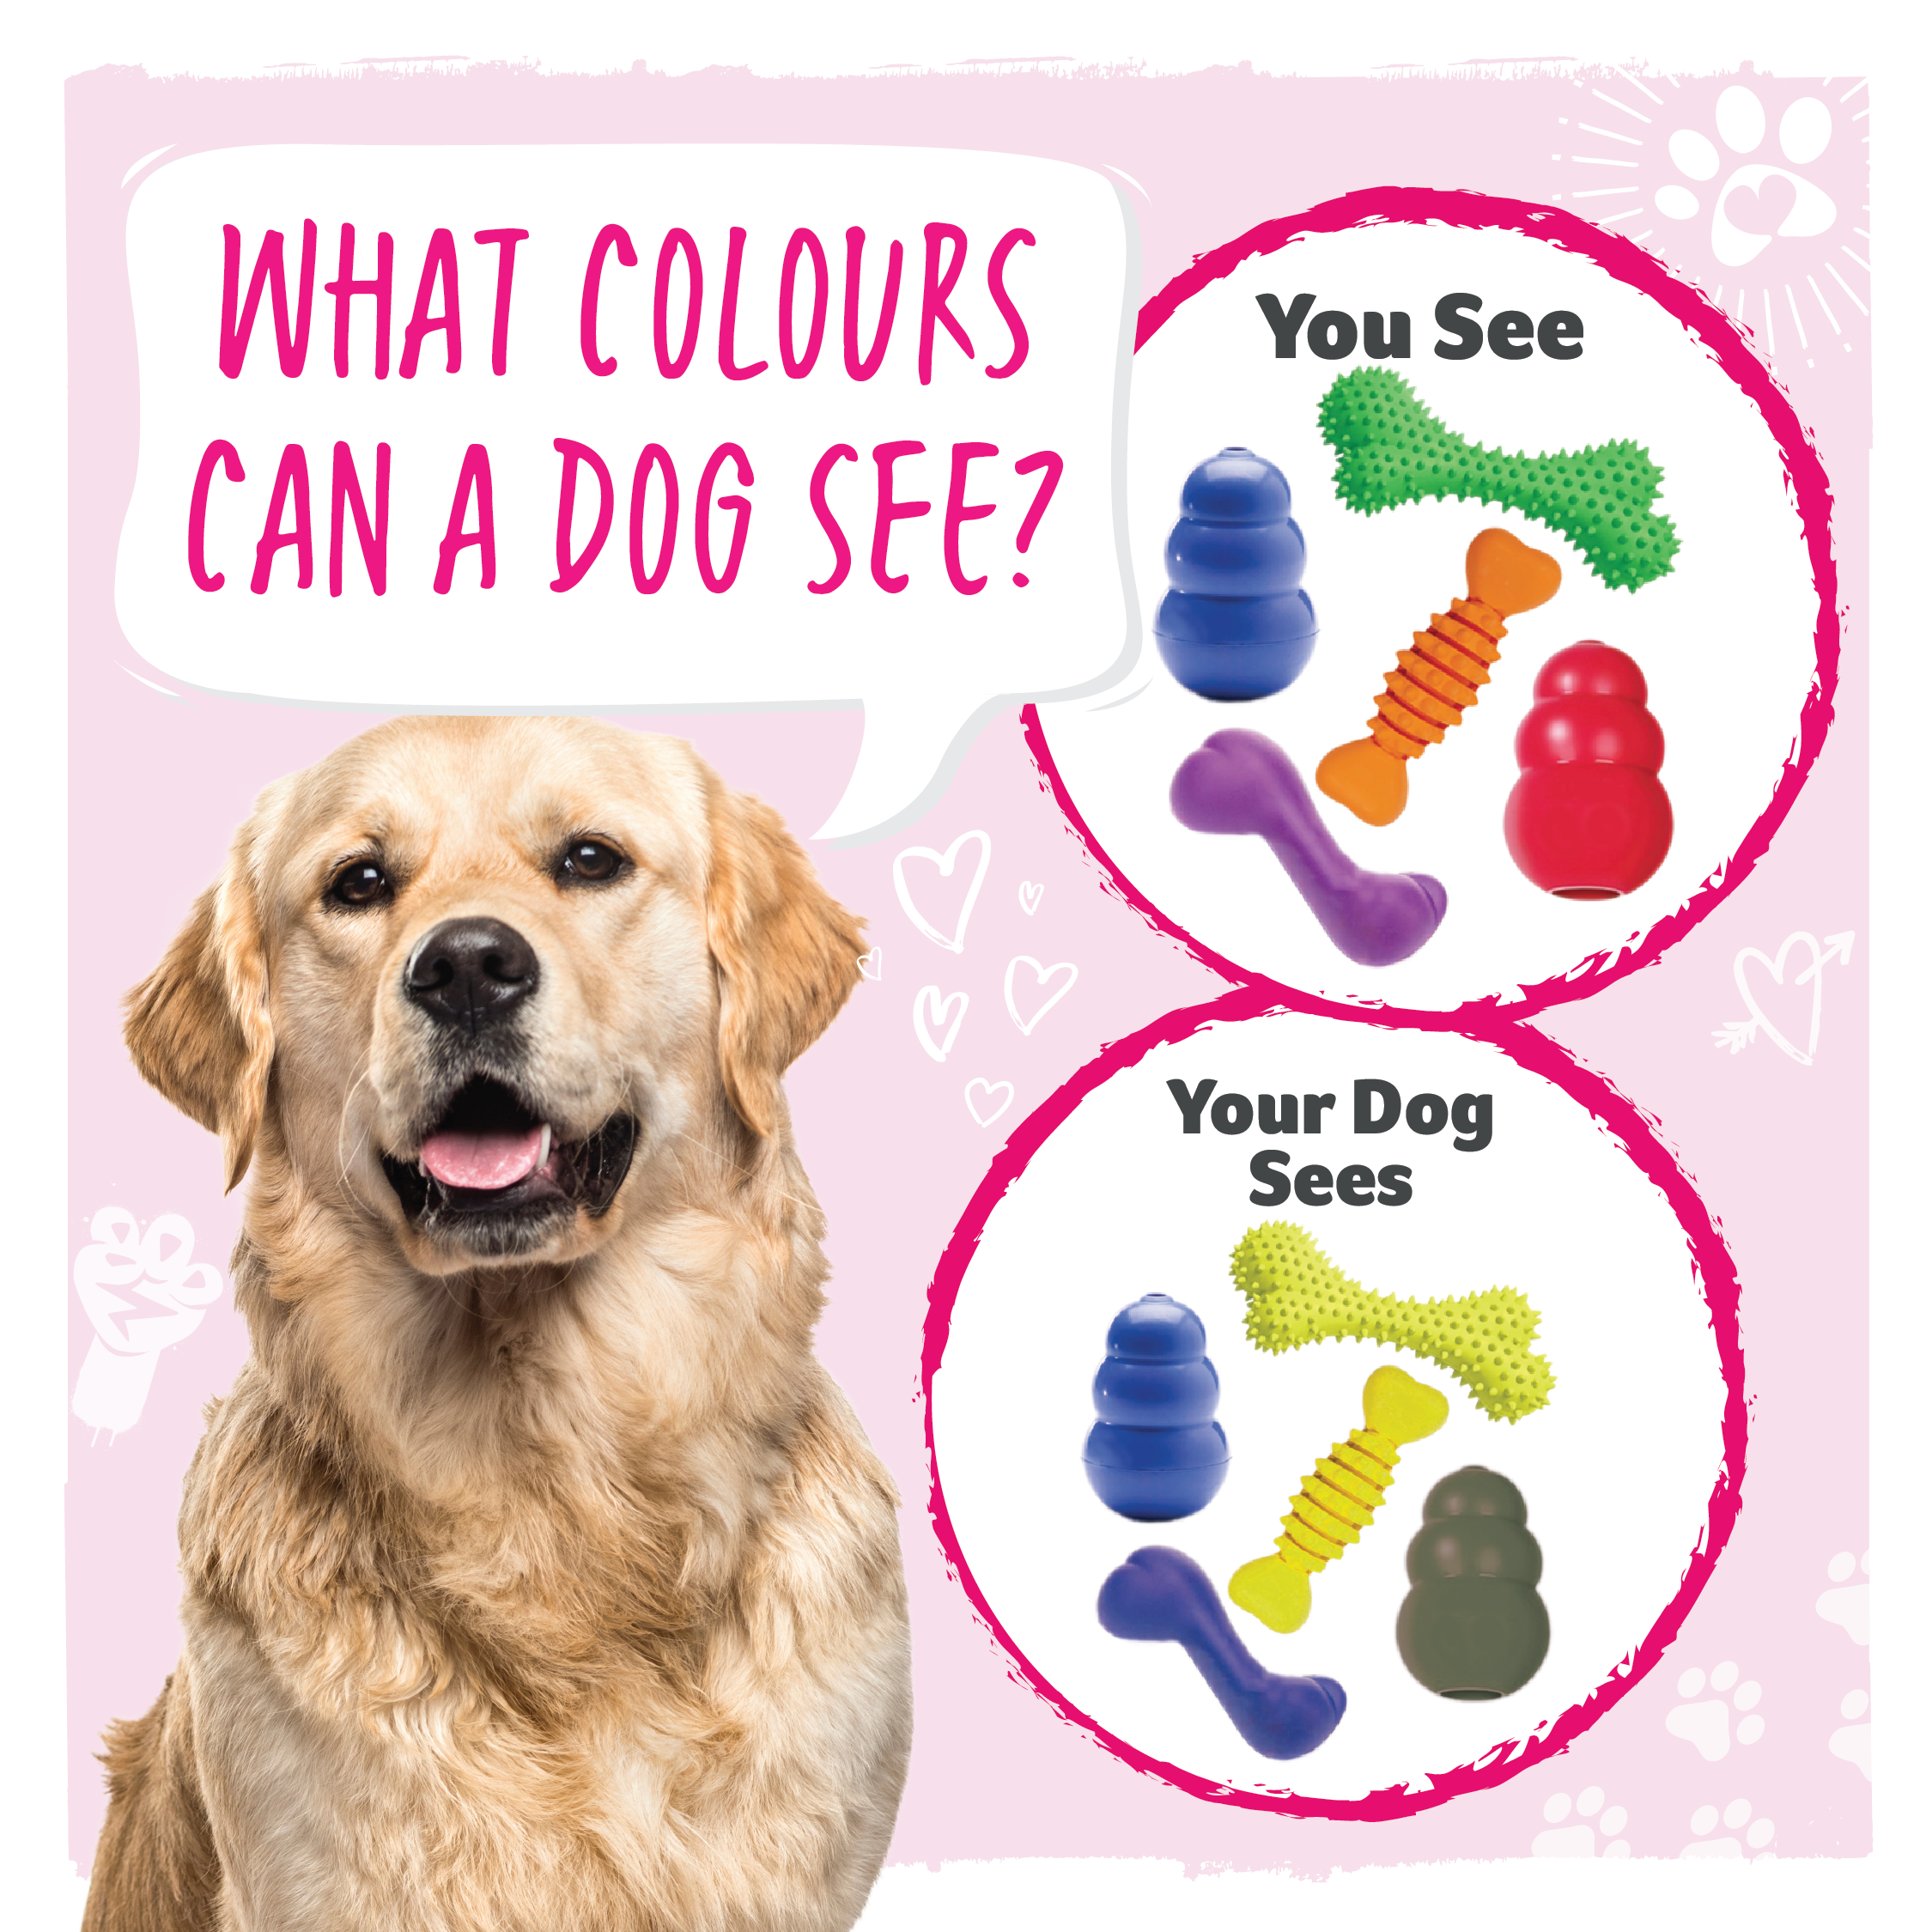 An illustration of the colours dogs see